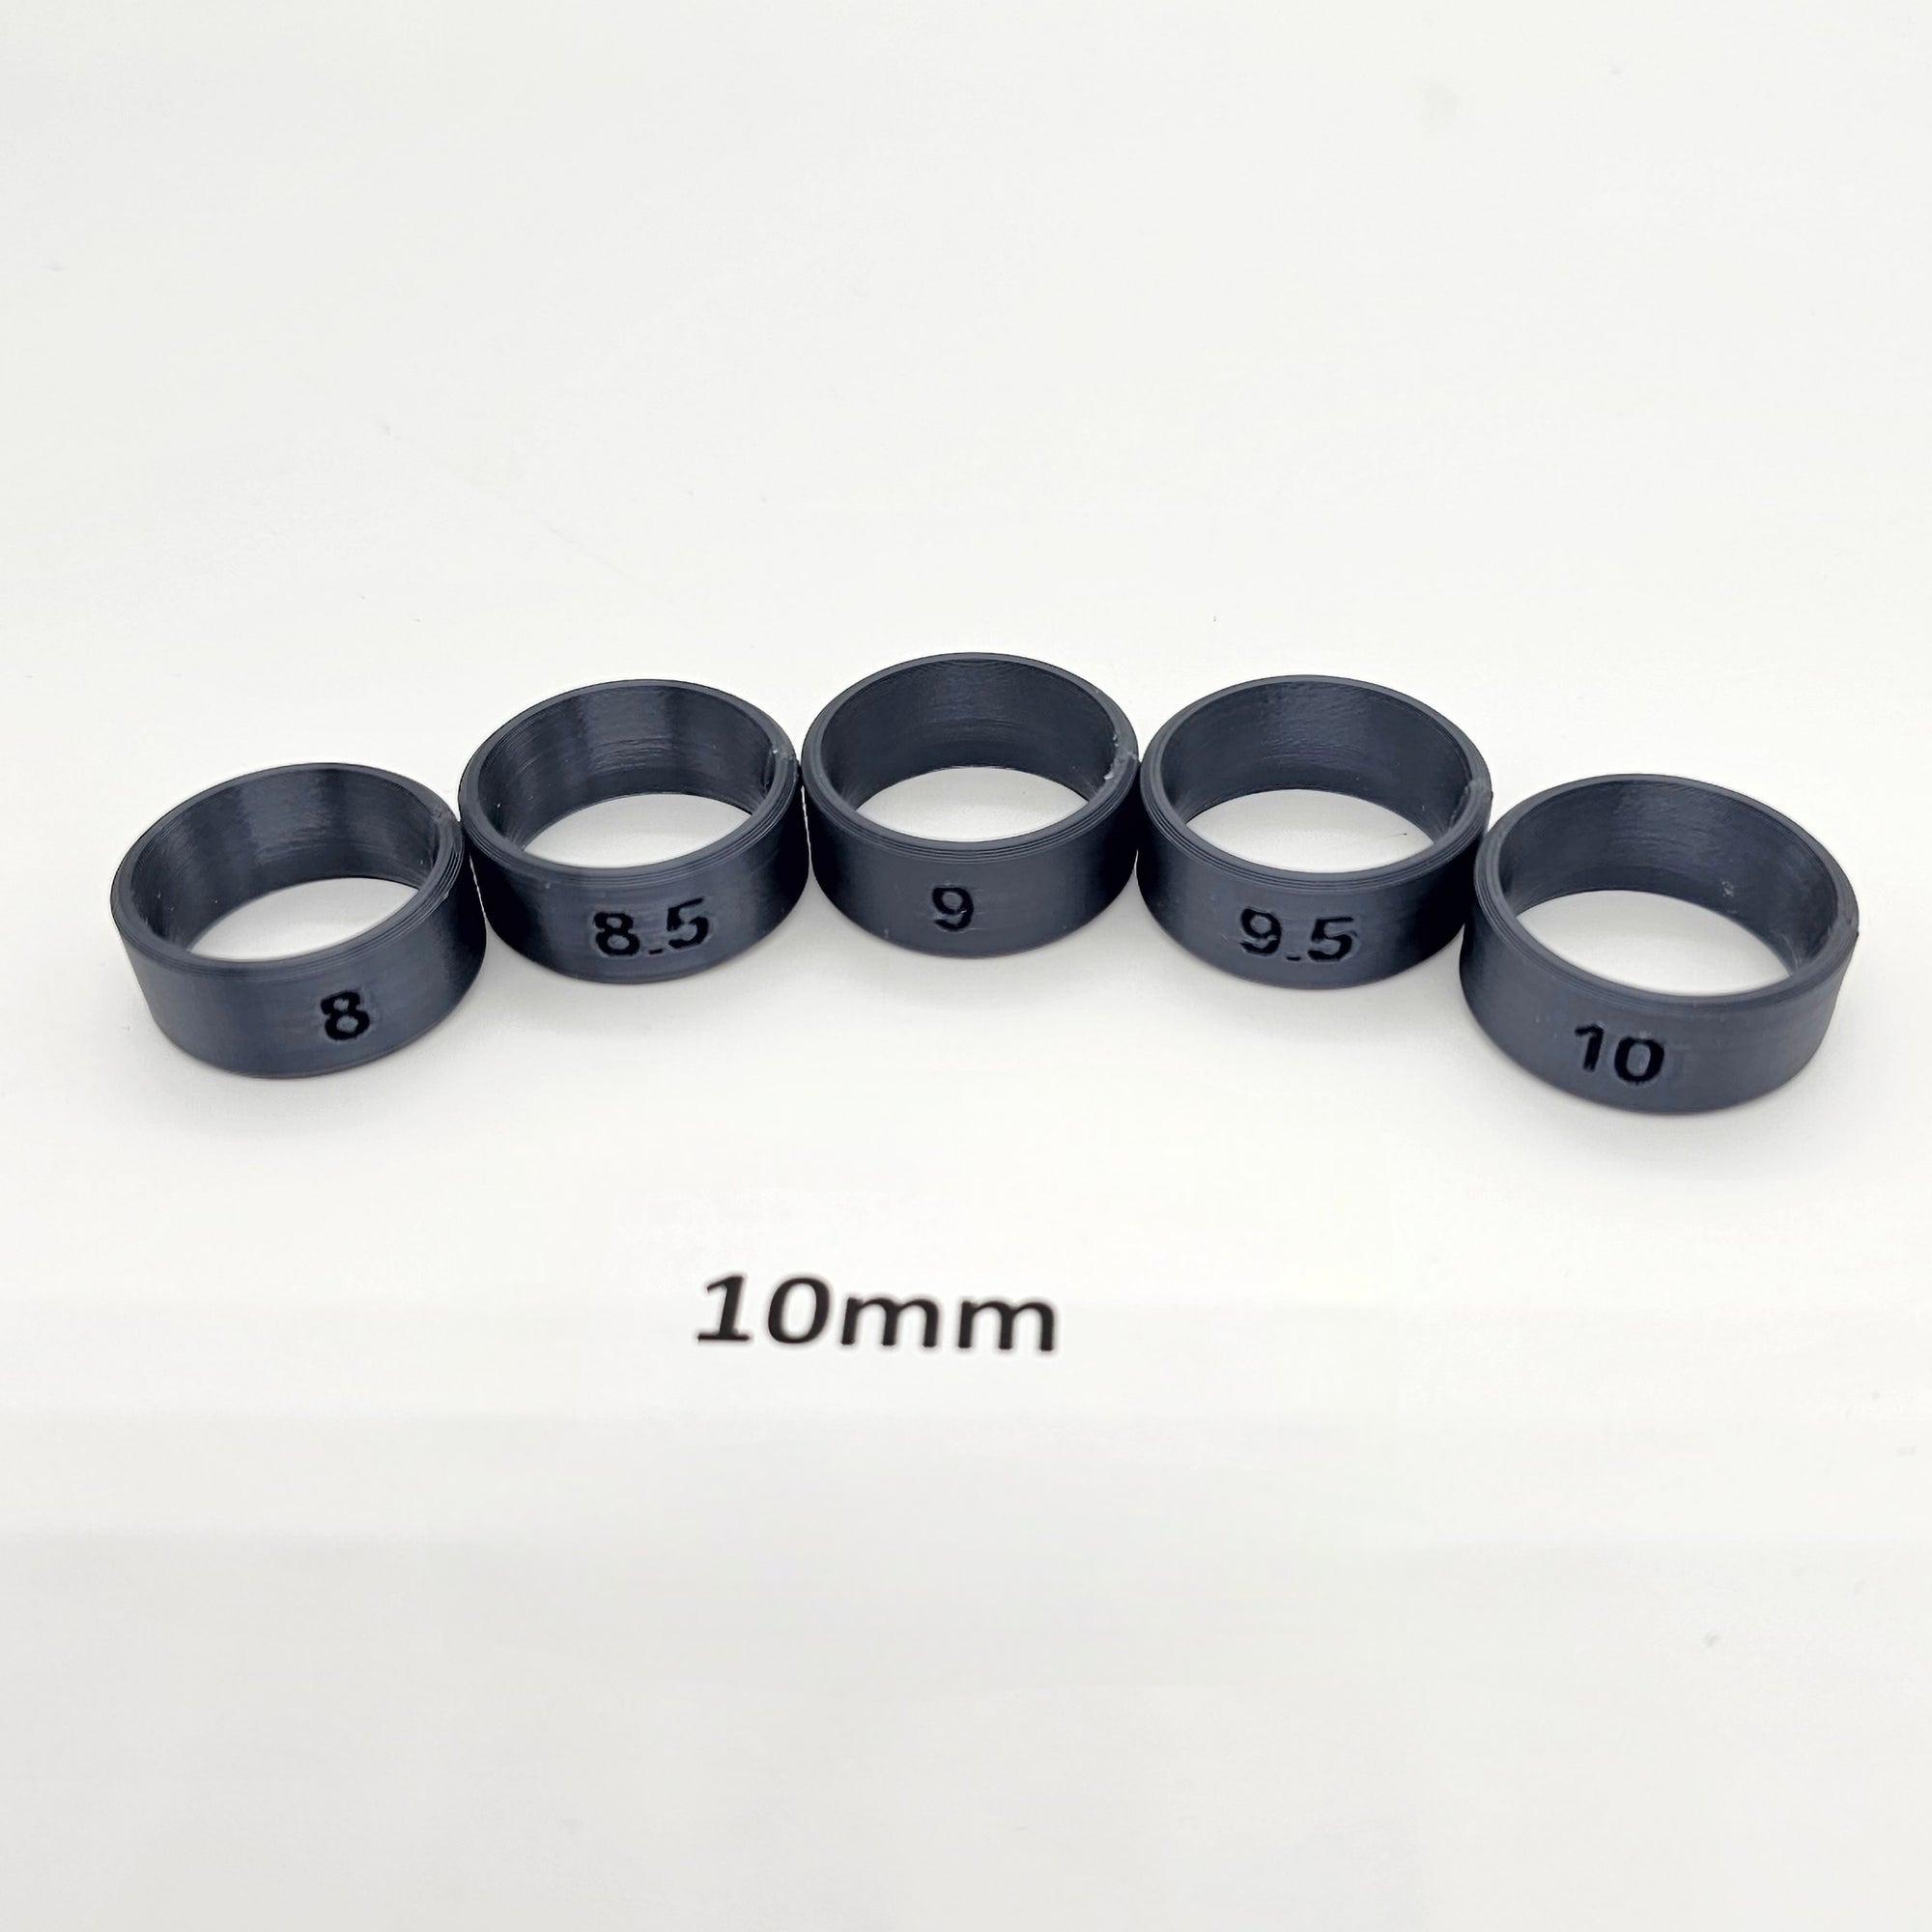 wide band ring sizers, shows set of 5 consecutive.